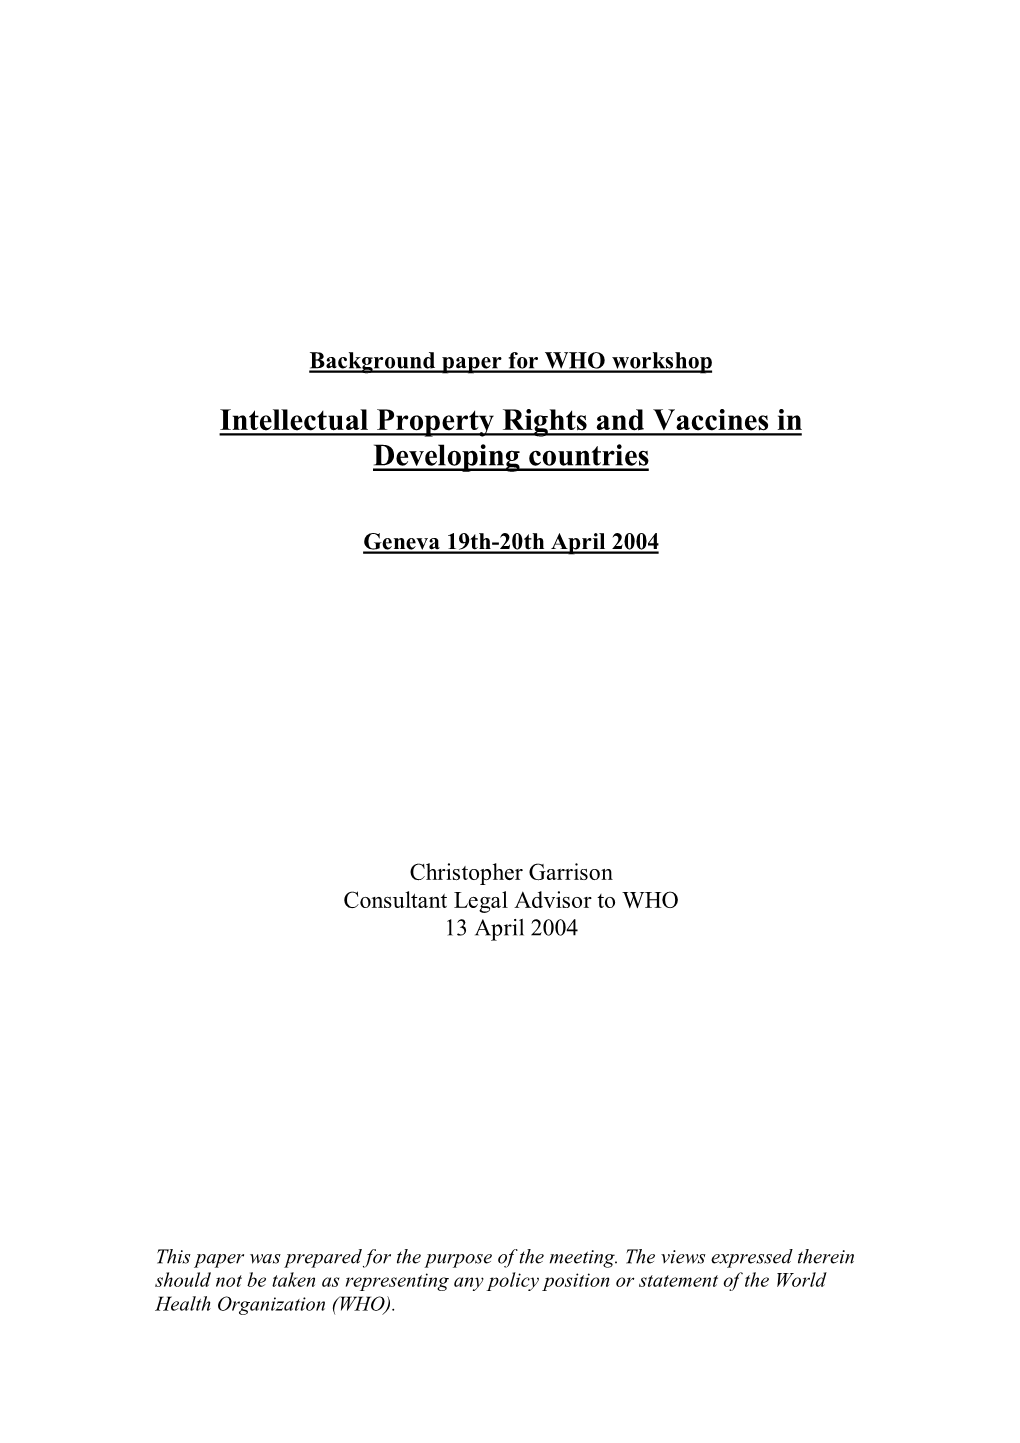 Intellectual Property Rights and Vaccines in Developing Countries